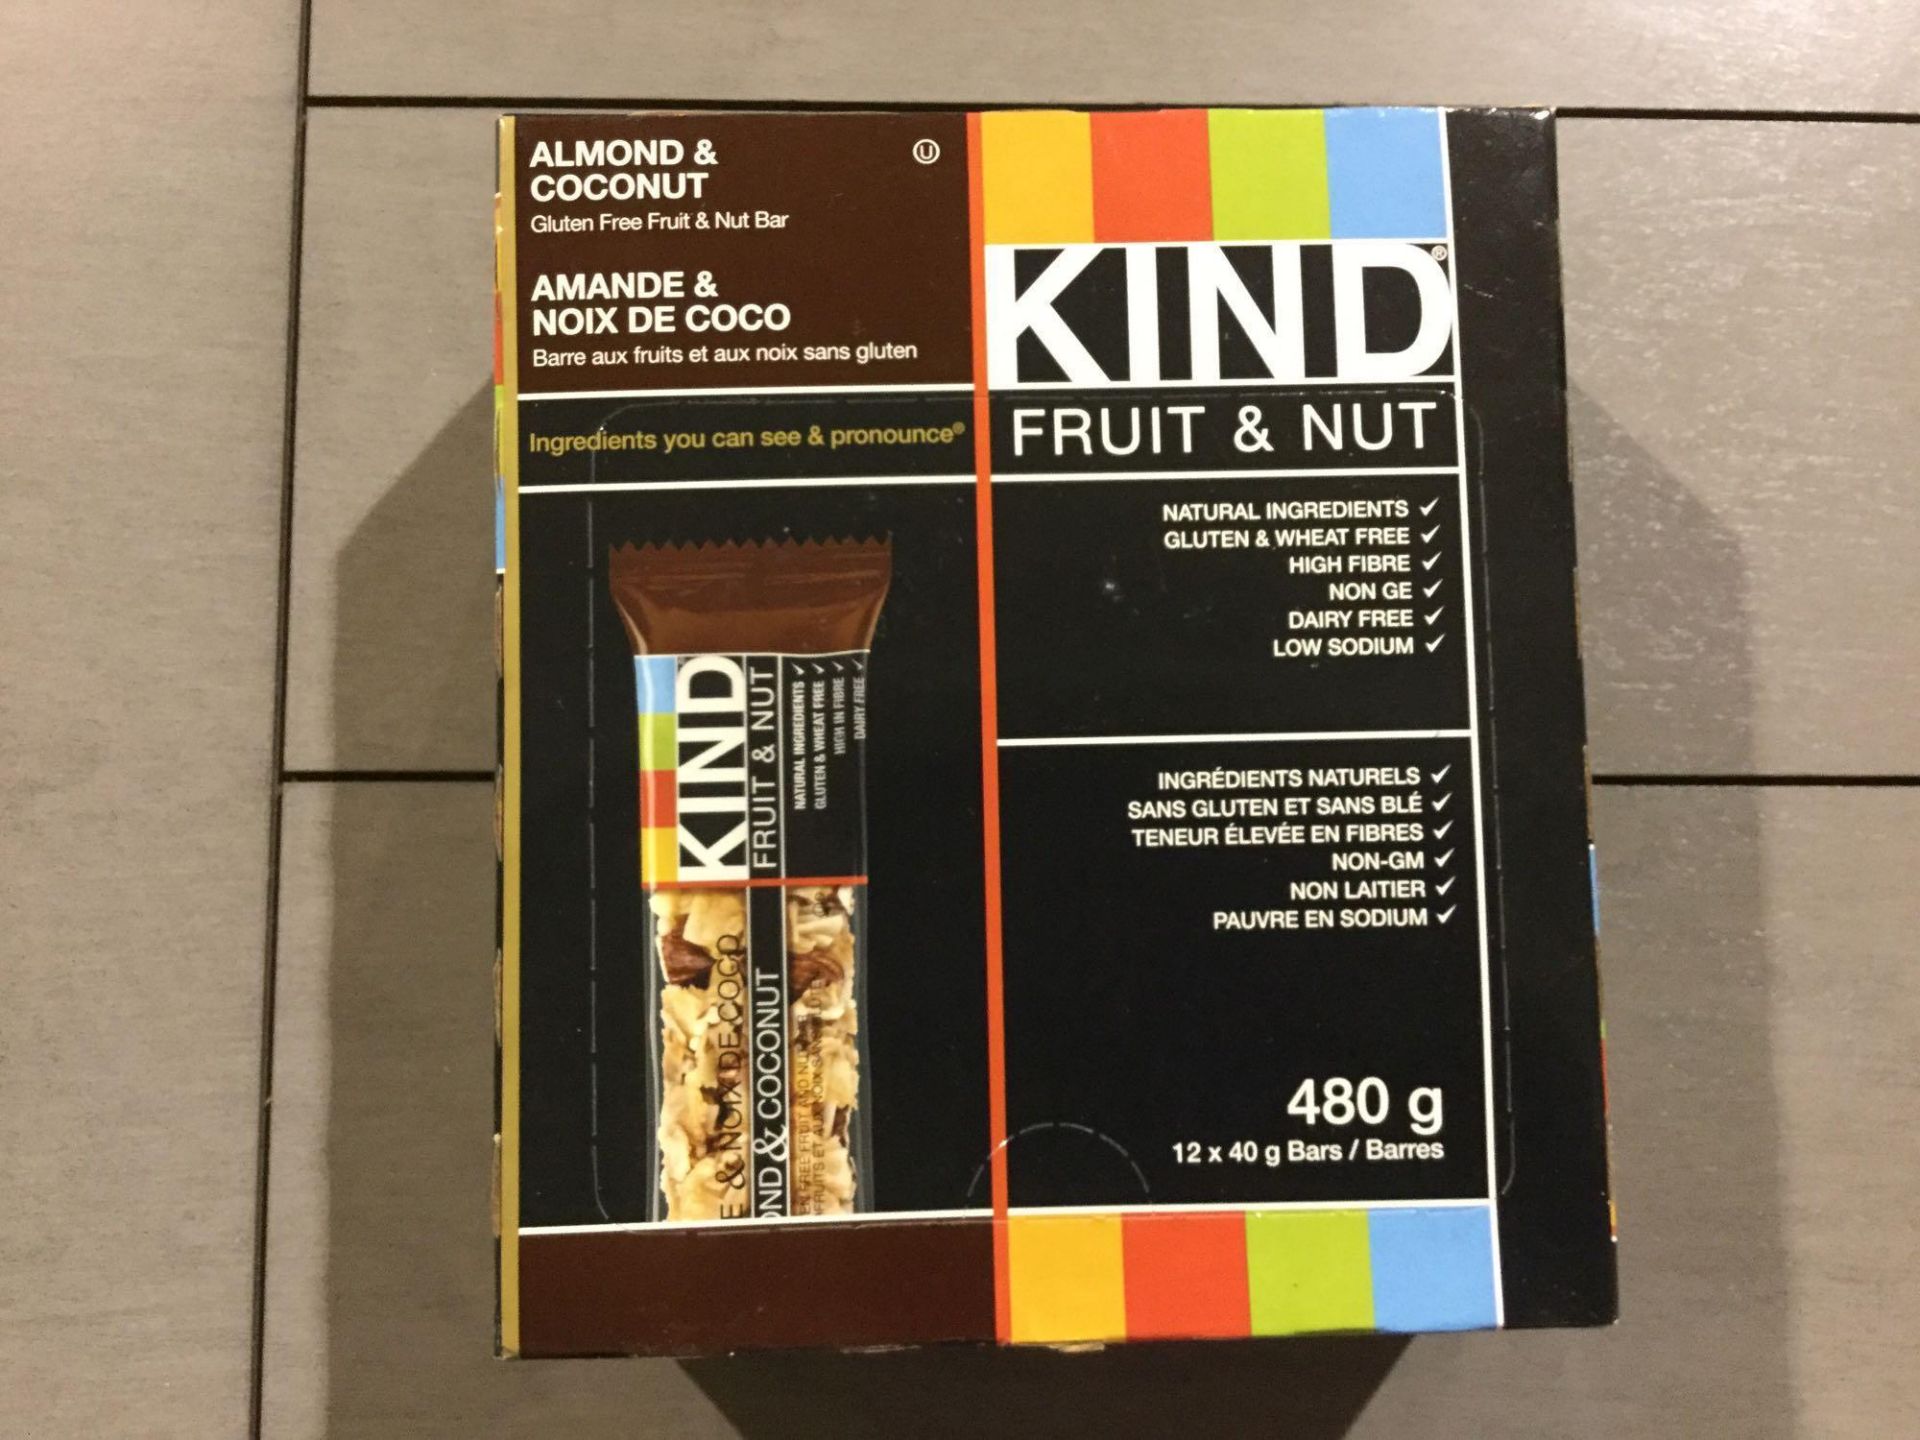 Box of 12 x 40 g Kind Fruit and Nut Bars - Almond and Coconut